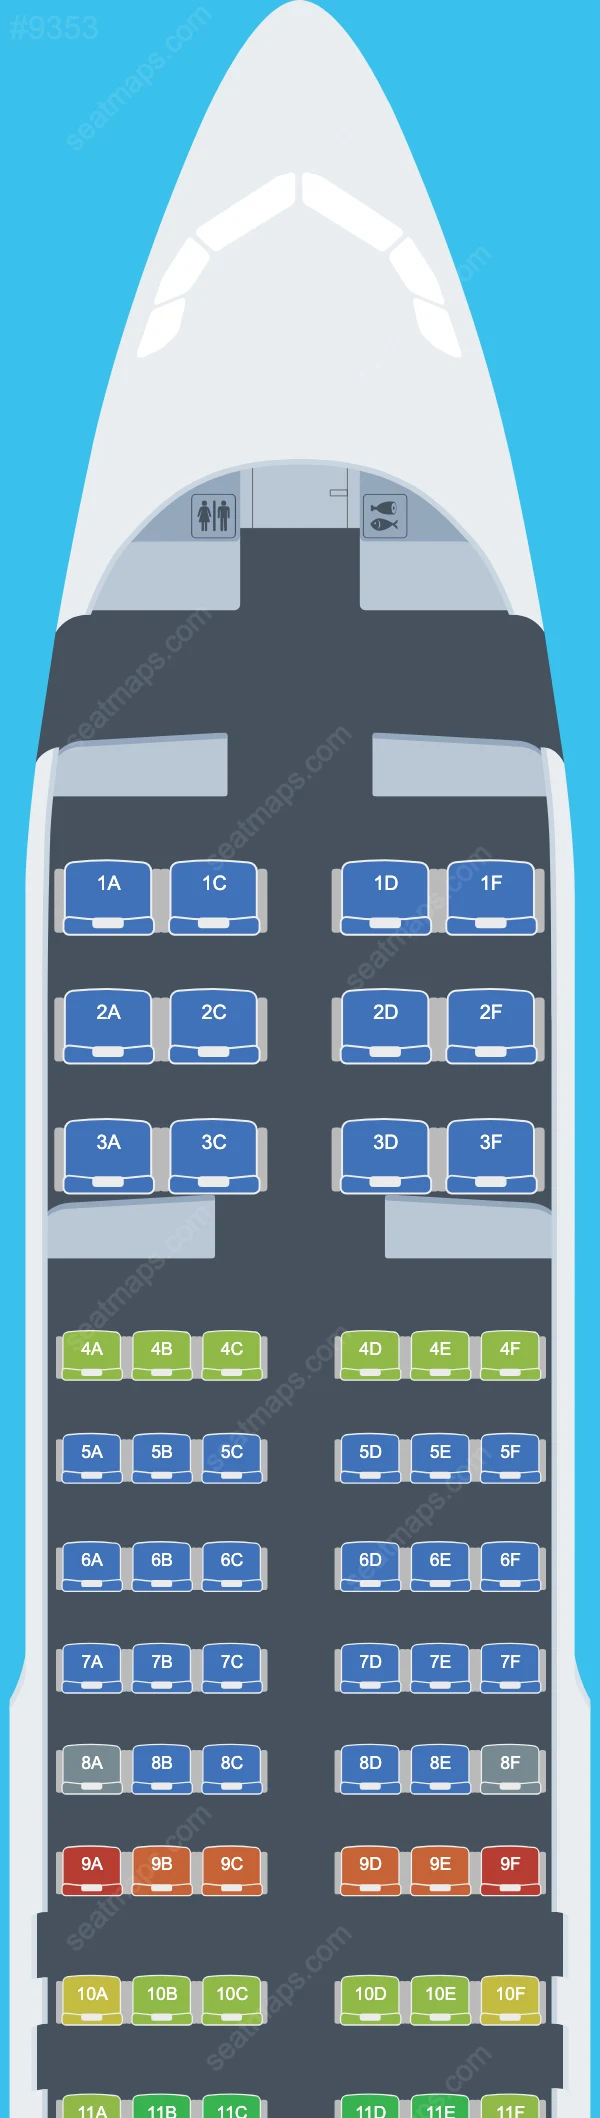 Ural Airlines Airbus A320 Seat Maps A320-200 V.2